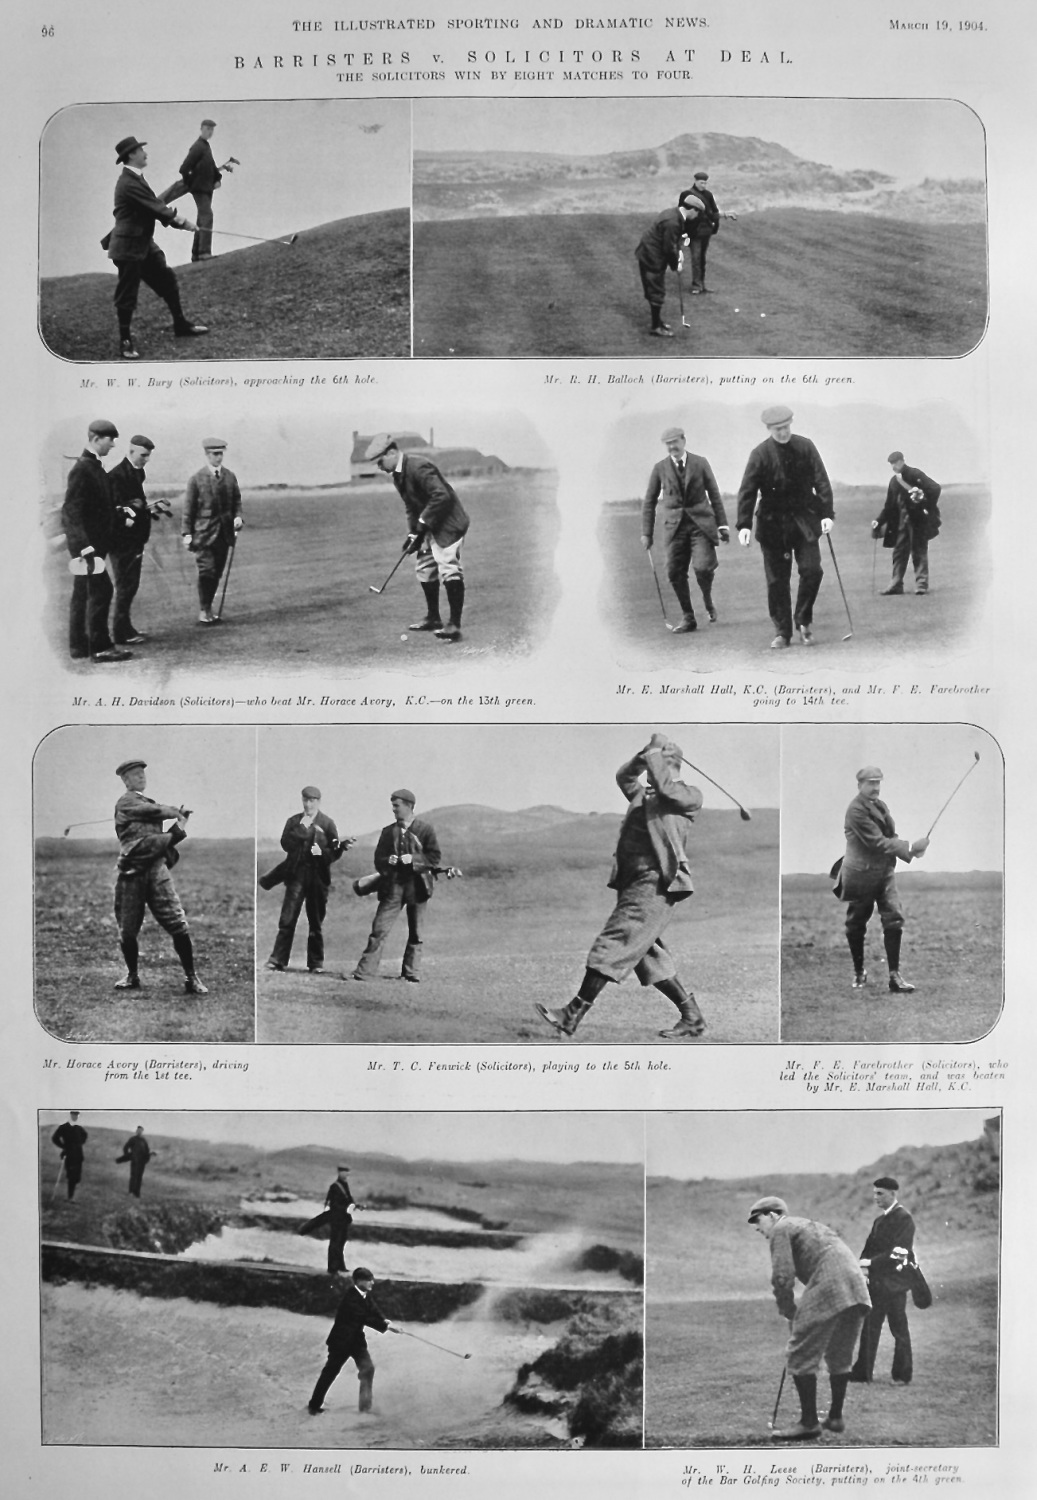 Barristers v. Solicitors at Deal.  1904.  (Golf)